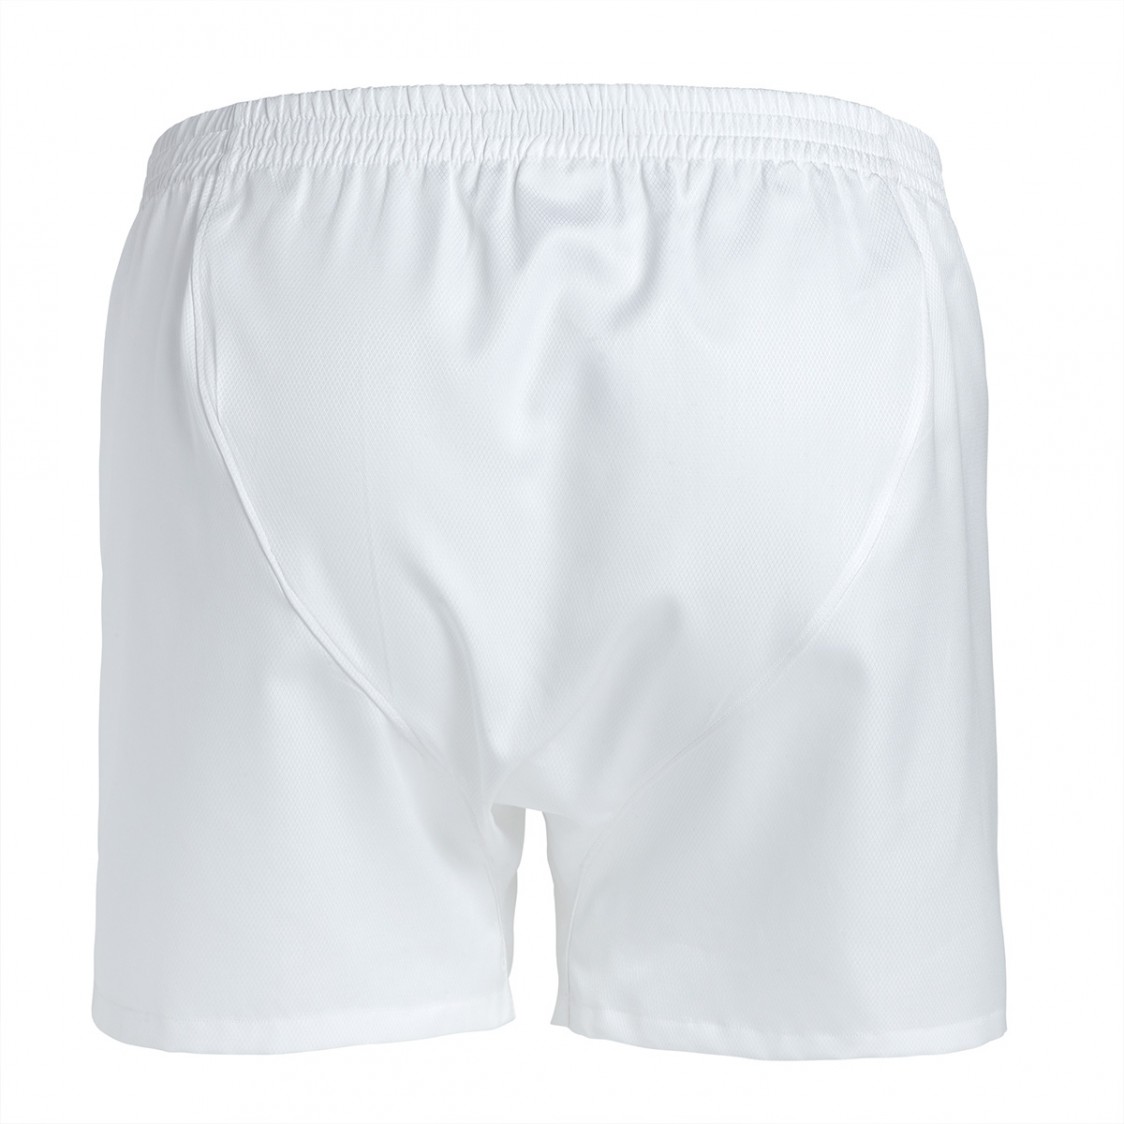 TAILORED BOXER SHORTS Nº 4 - The Perfect Son : The Perfect Son